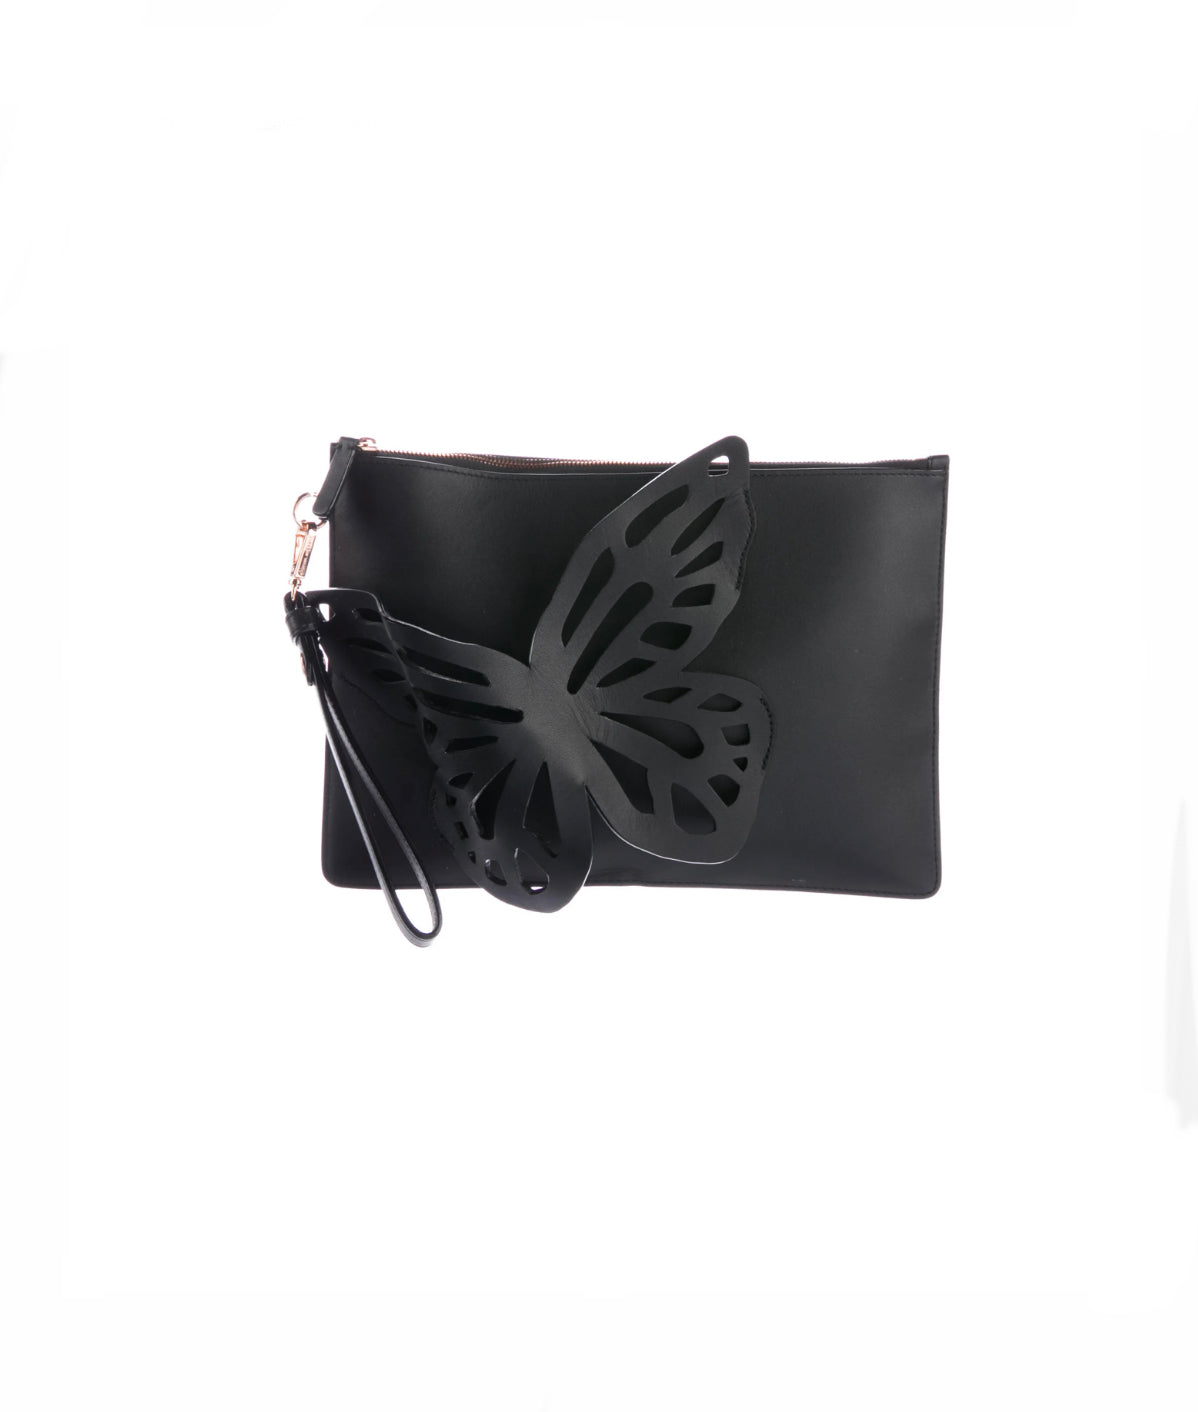 Load image into Gallery viewer, Sophia Webster Black Butterfly Clutch
